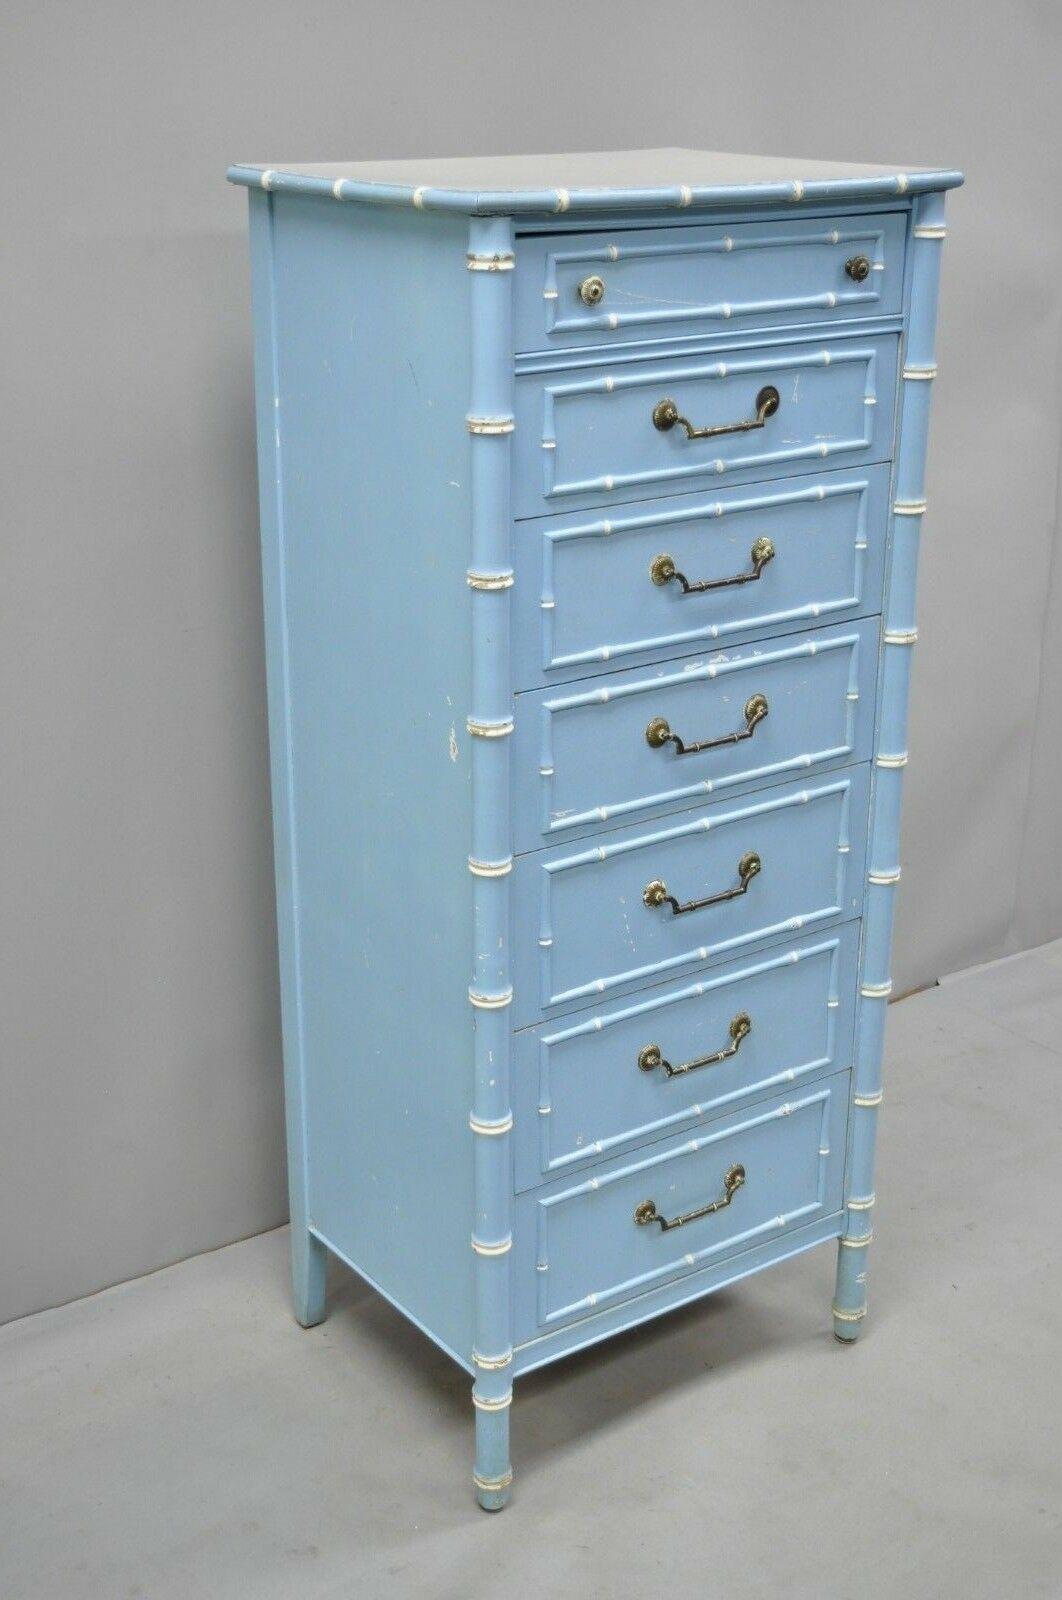 Vintage Thomasville Allegro faux bamboo 7 drawer painted tall lingerie chest. Item features laminate top, blue painted finish, nicely carved details, original stamp, 7 dovetailed drawers, solid brass hardware. Circa Mid to Late 20th Century.